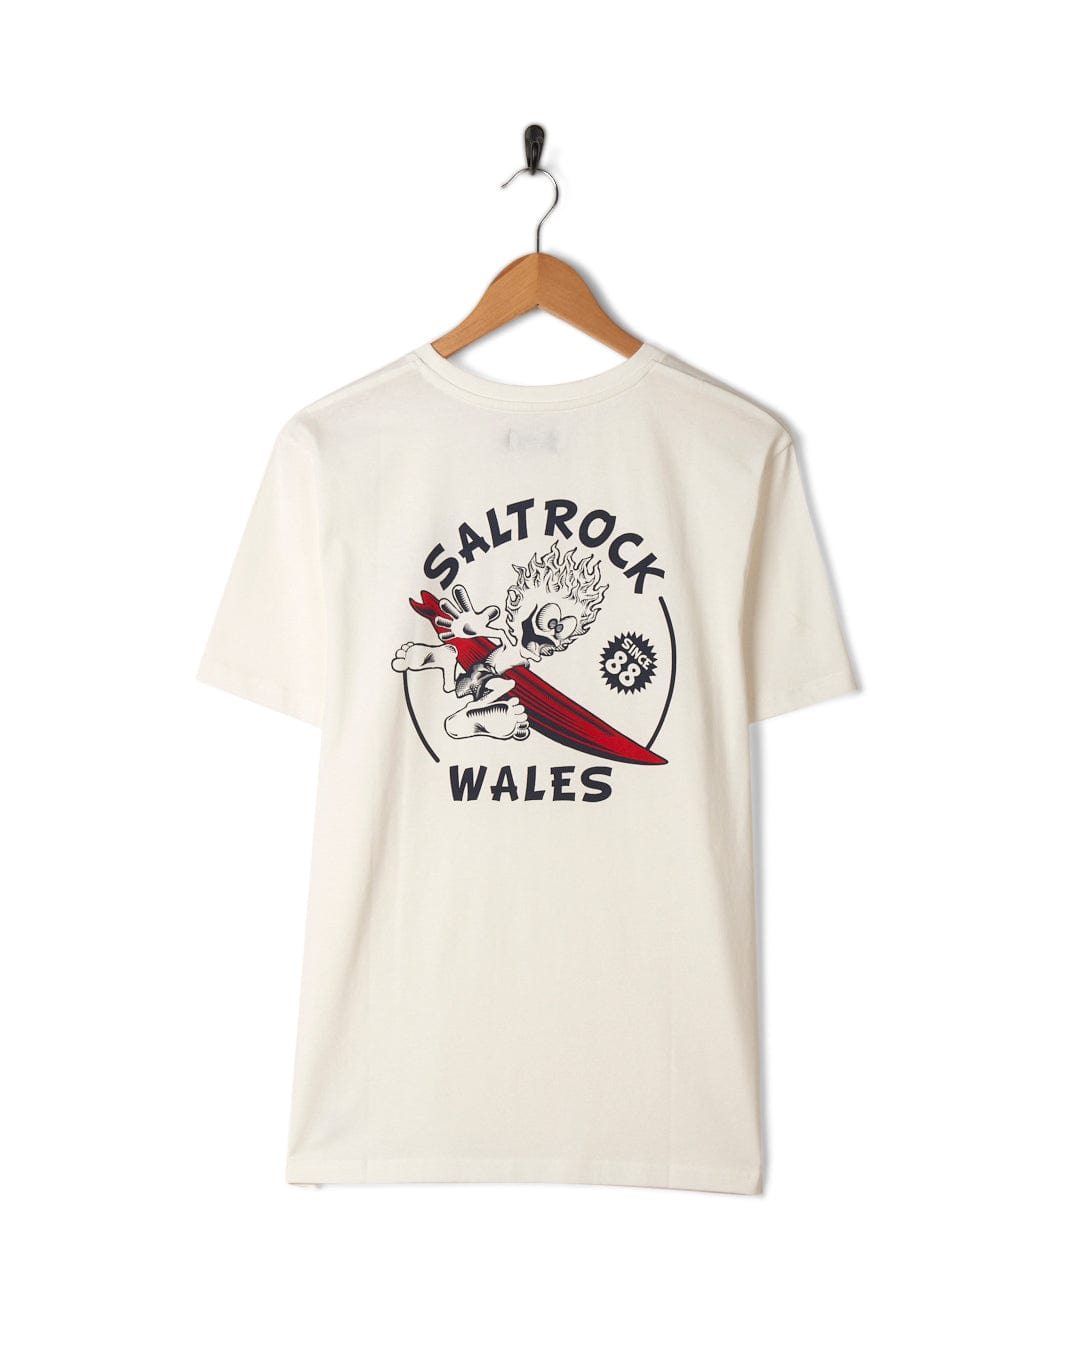 A Wave Rider Wales white t-shirt with the words Saltrock Wales on it.